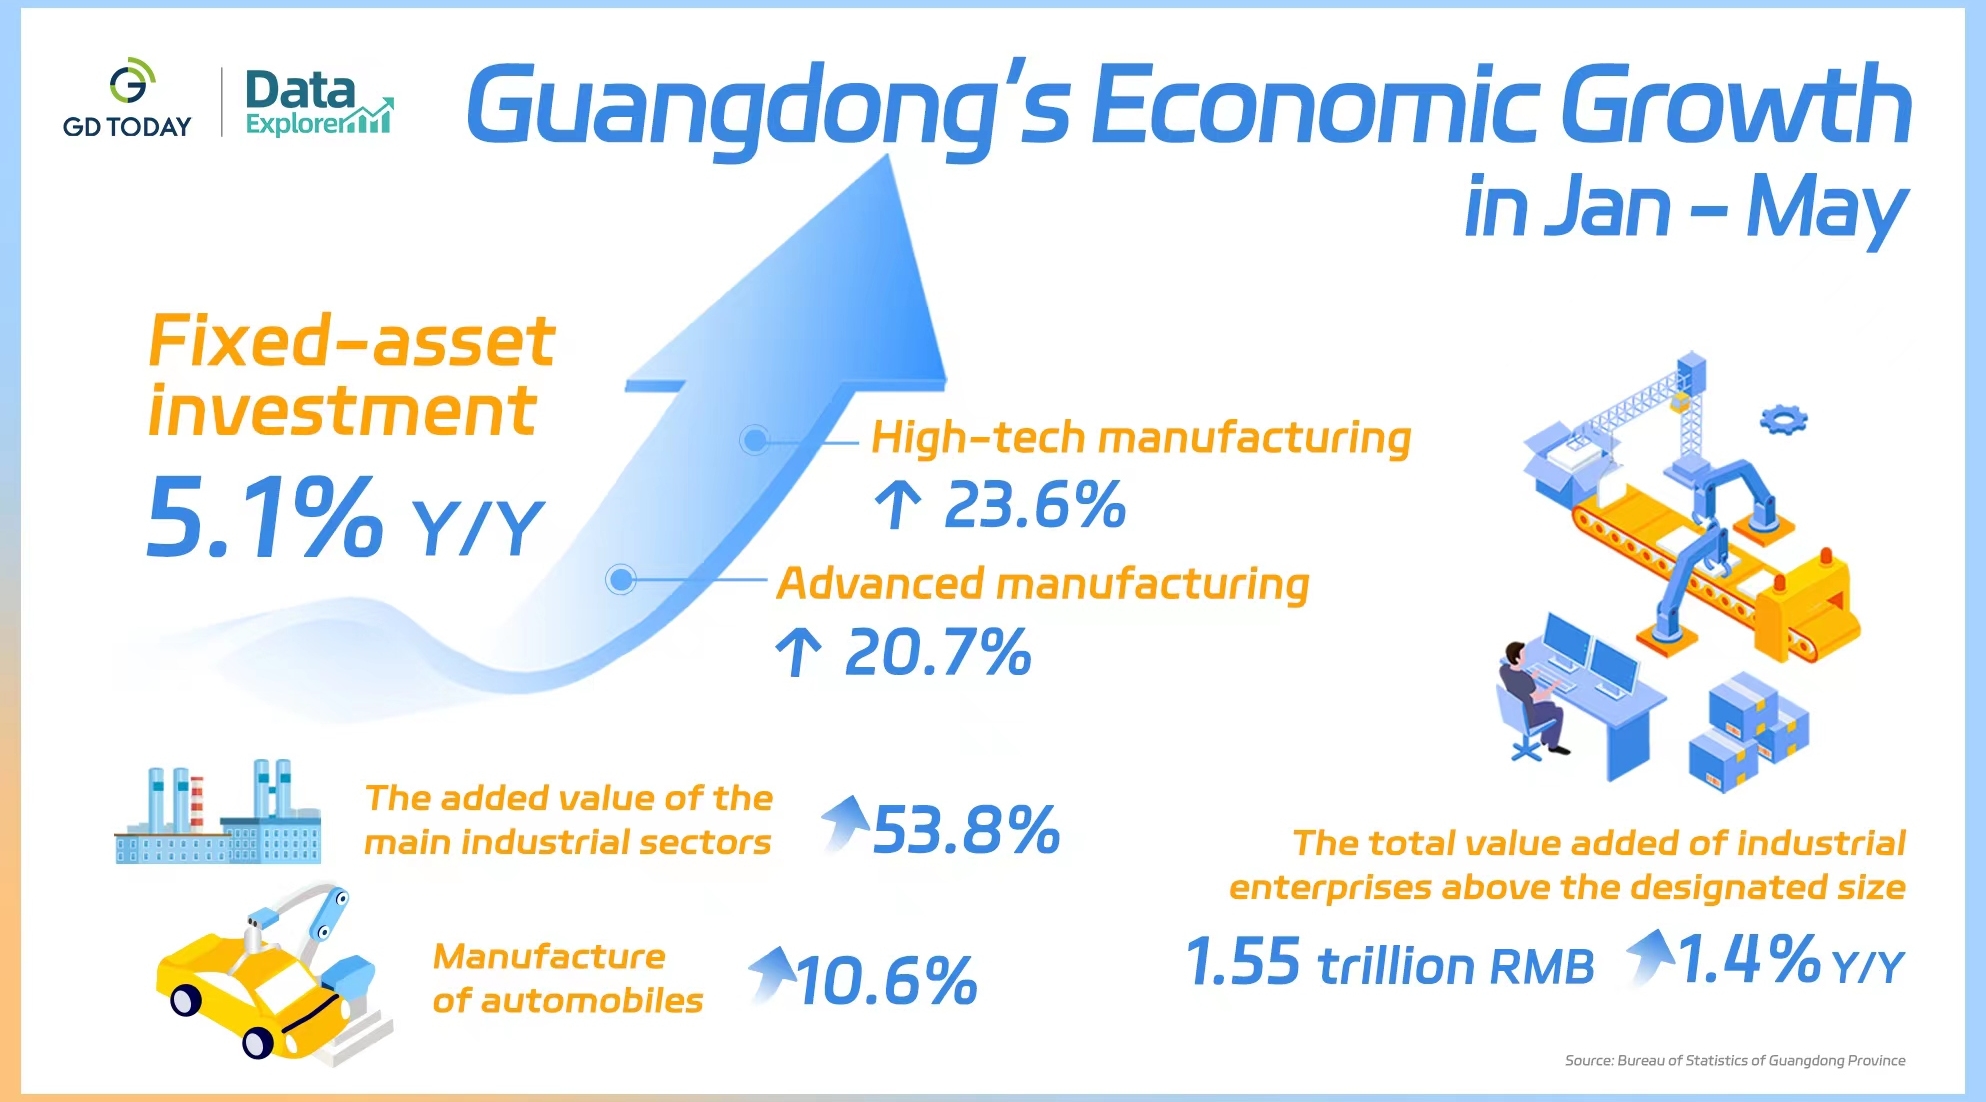 Data Explorer | Guangdong’s investment in manufacturing sector posts double-digit growth in Jan - May